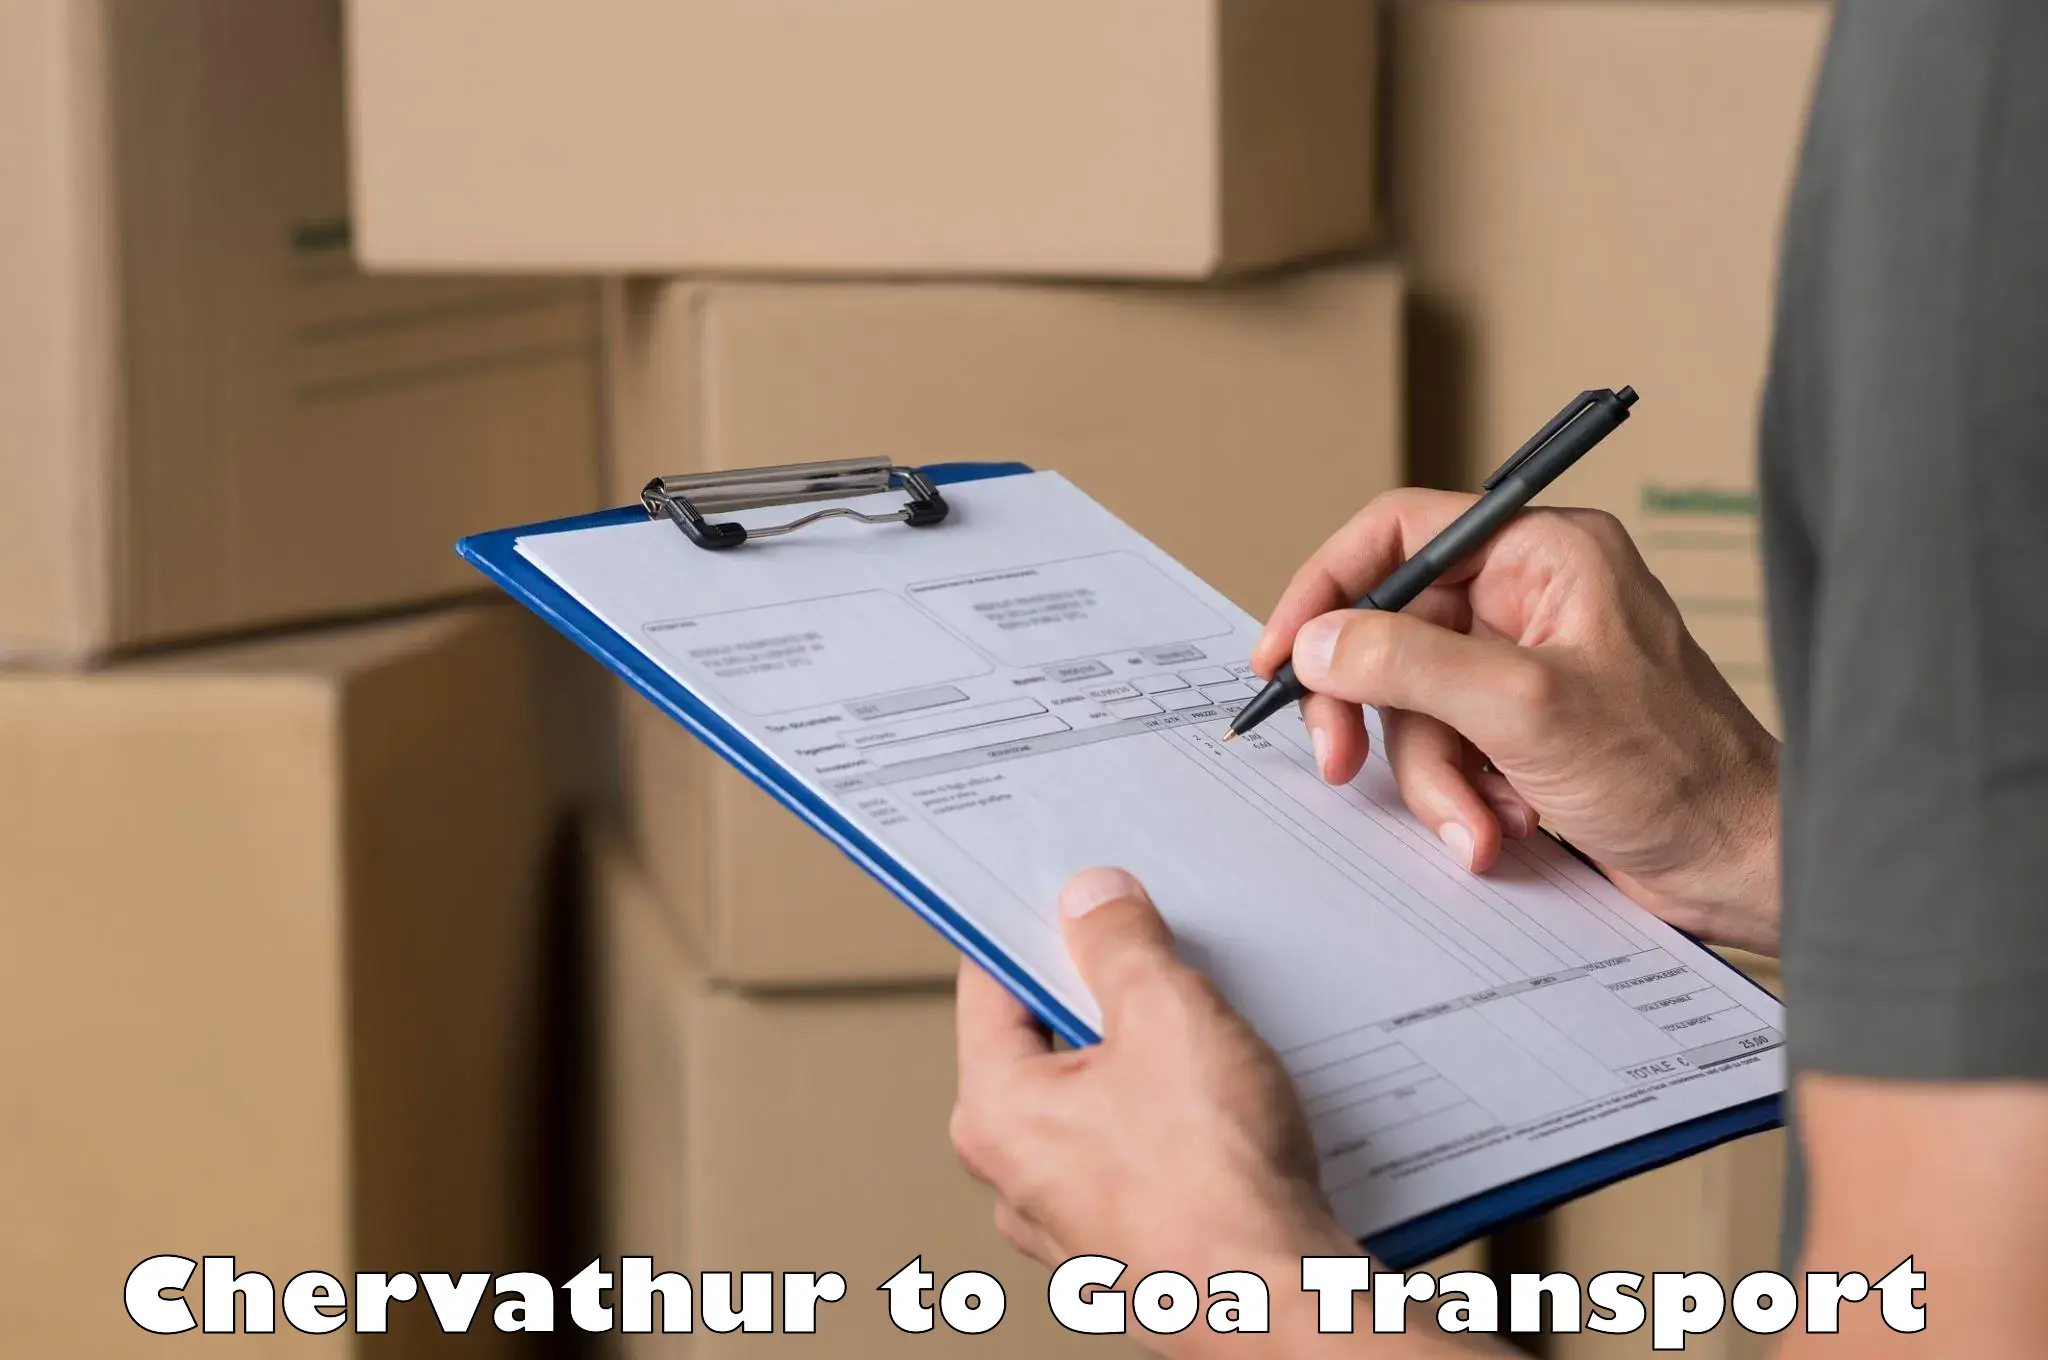 Delivery service Chervathur to IIT Goa